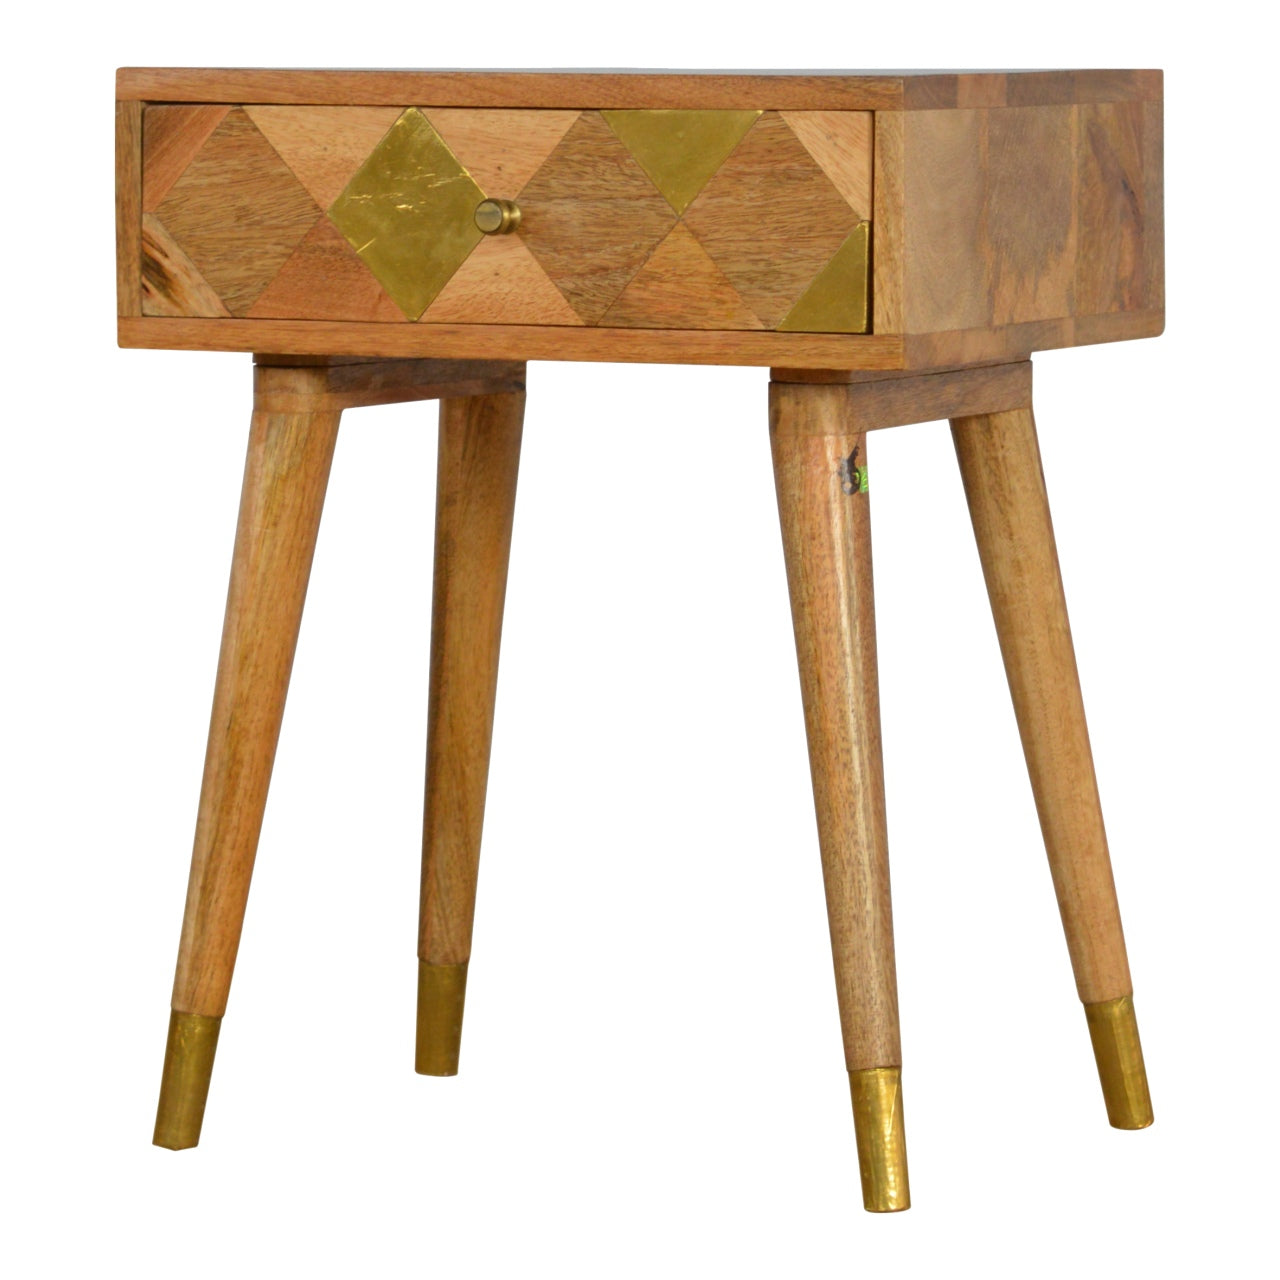 Oak-ish Gold Brass Inlay and Wood Bedside Table